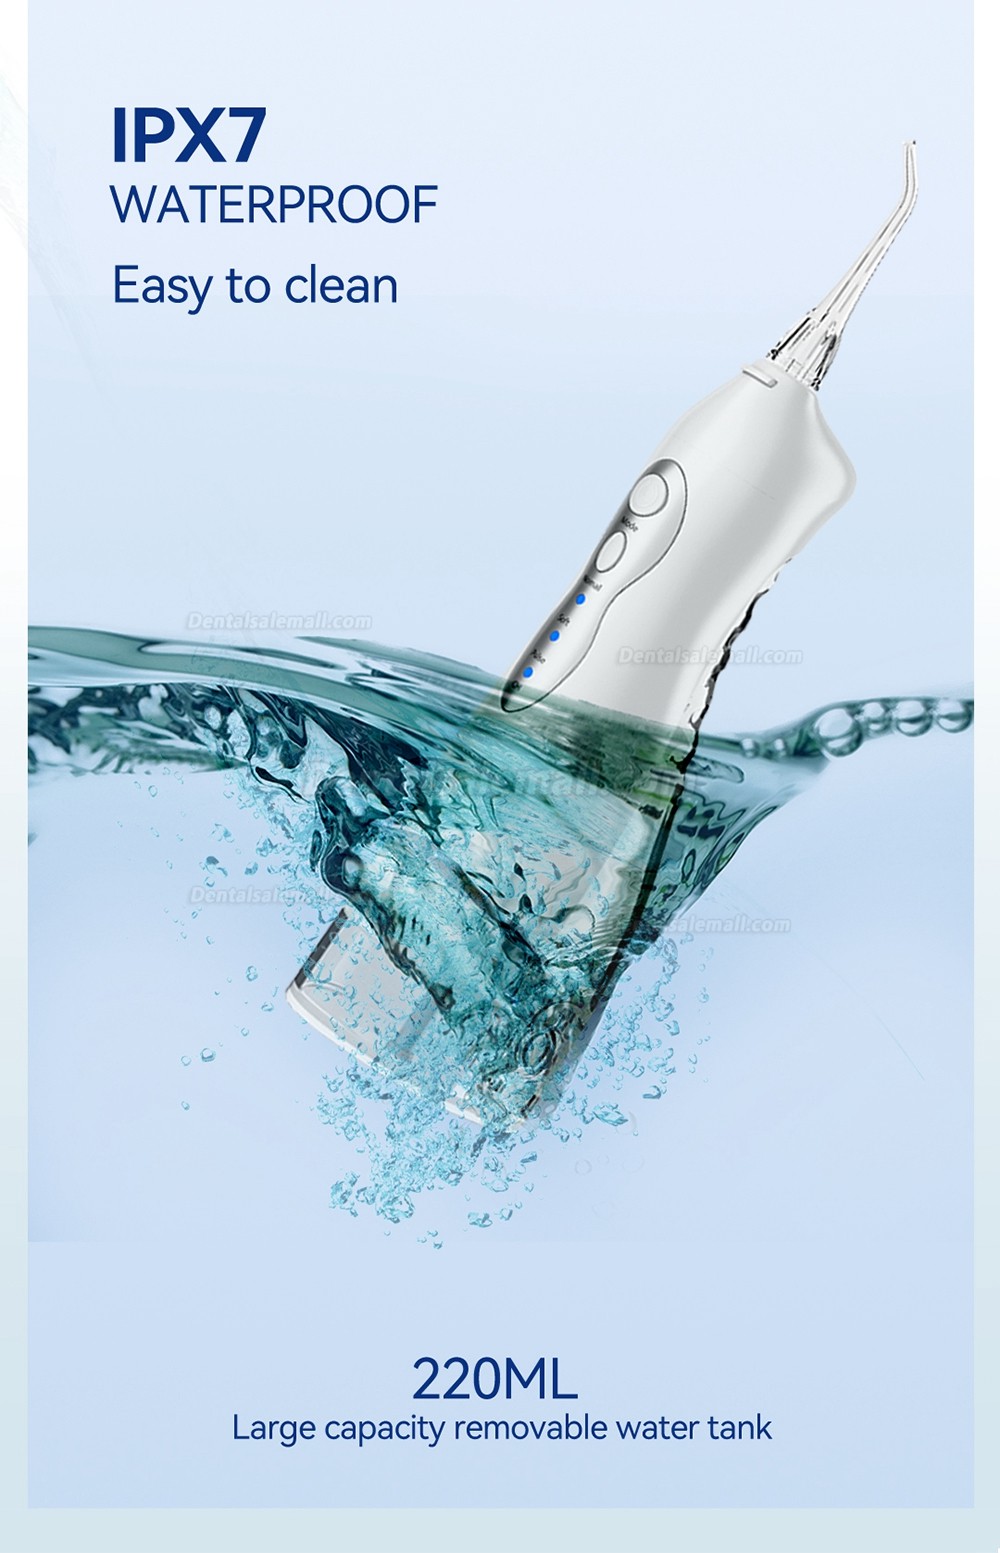 Portable Oral Irrigator USB Rechargeable Dental Water Jet Water Tank Waterproof Travel Family